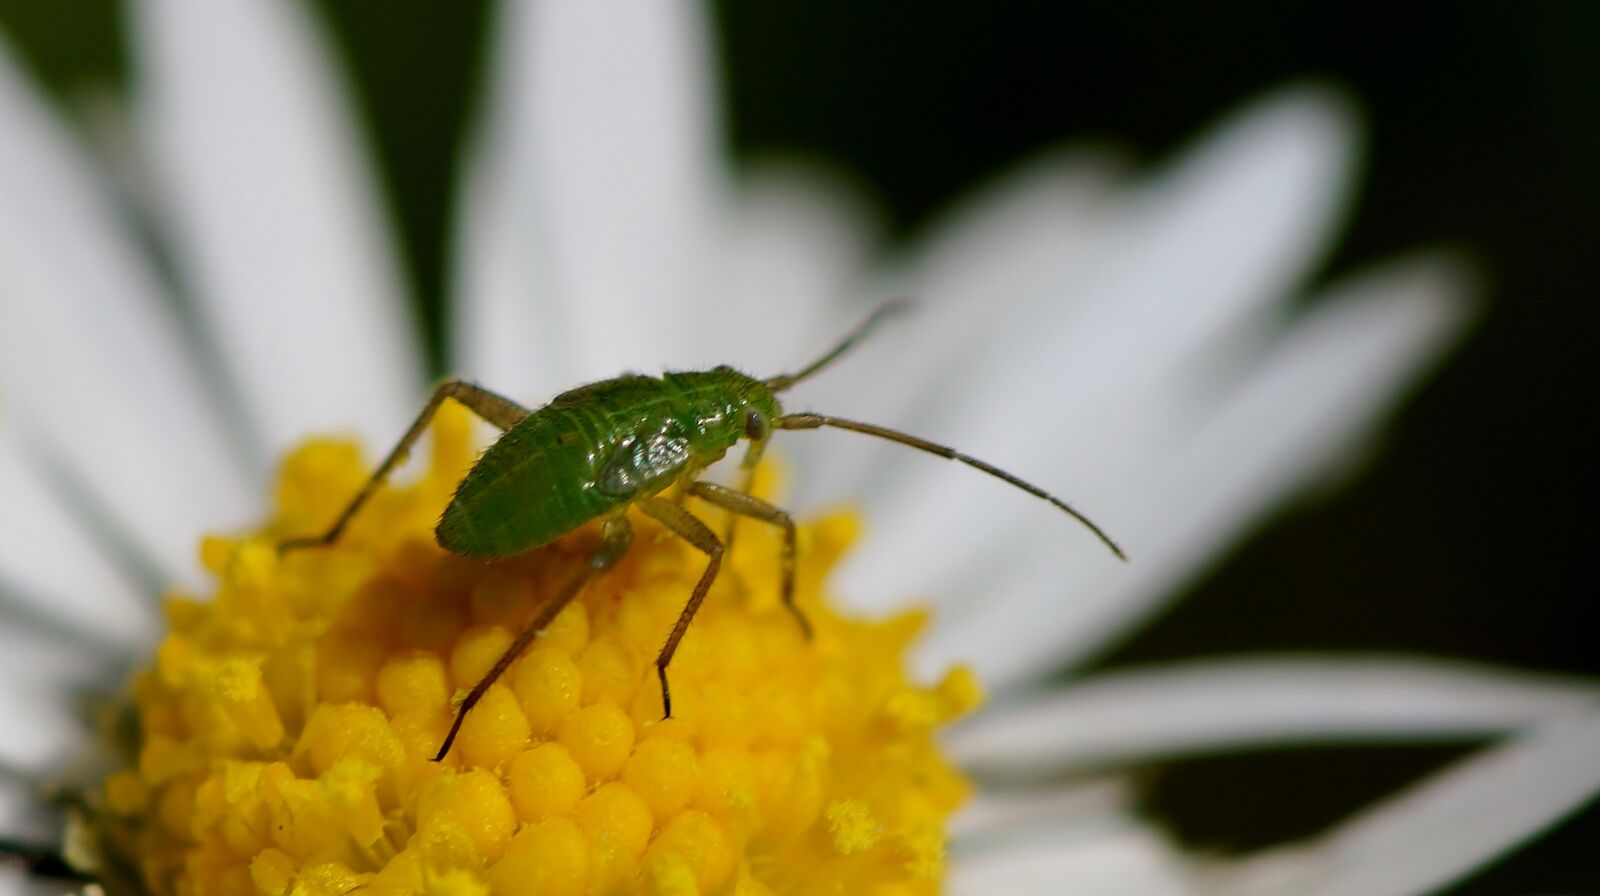 Sony SLT-A77 sample photo. Nature, insect, invertebrate photography